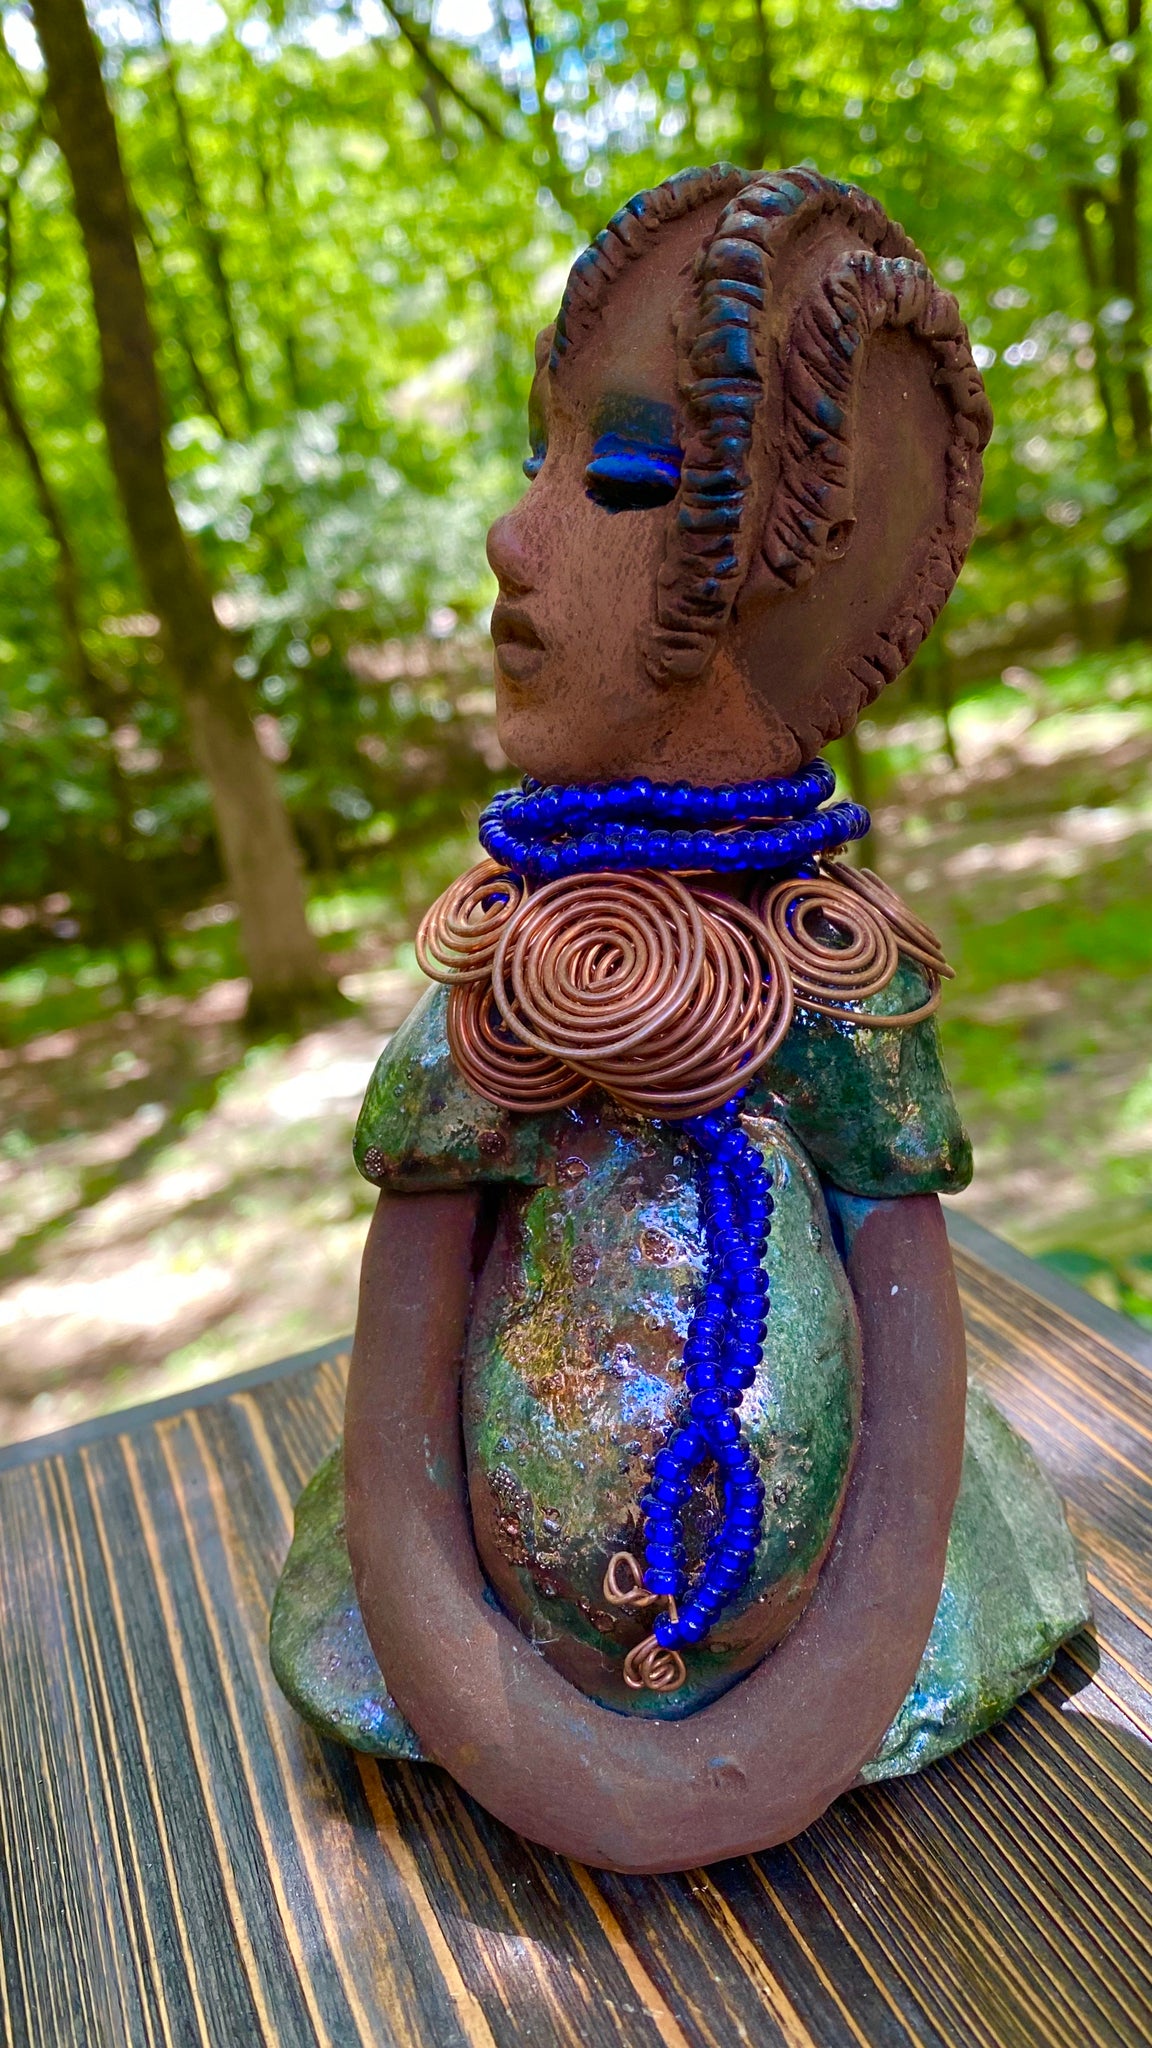 Meet  Ife! Ife stands 7.5" x 4" x 5" and weighs 1.02  lbs. She has a lovely honey brown complexion with reddish brown lips. She has a short braided hairstyle.  Ife has a colorful metallic antique copper glazed dress. She wears spiral copper wire necklaces on top of an aqua blue beaded collar. Ife long loving arms rest at her side. With accent blue eye shadow and eyes wide opened, Ife has hopes of finding a new home.